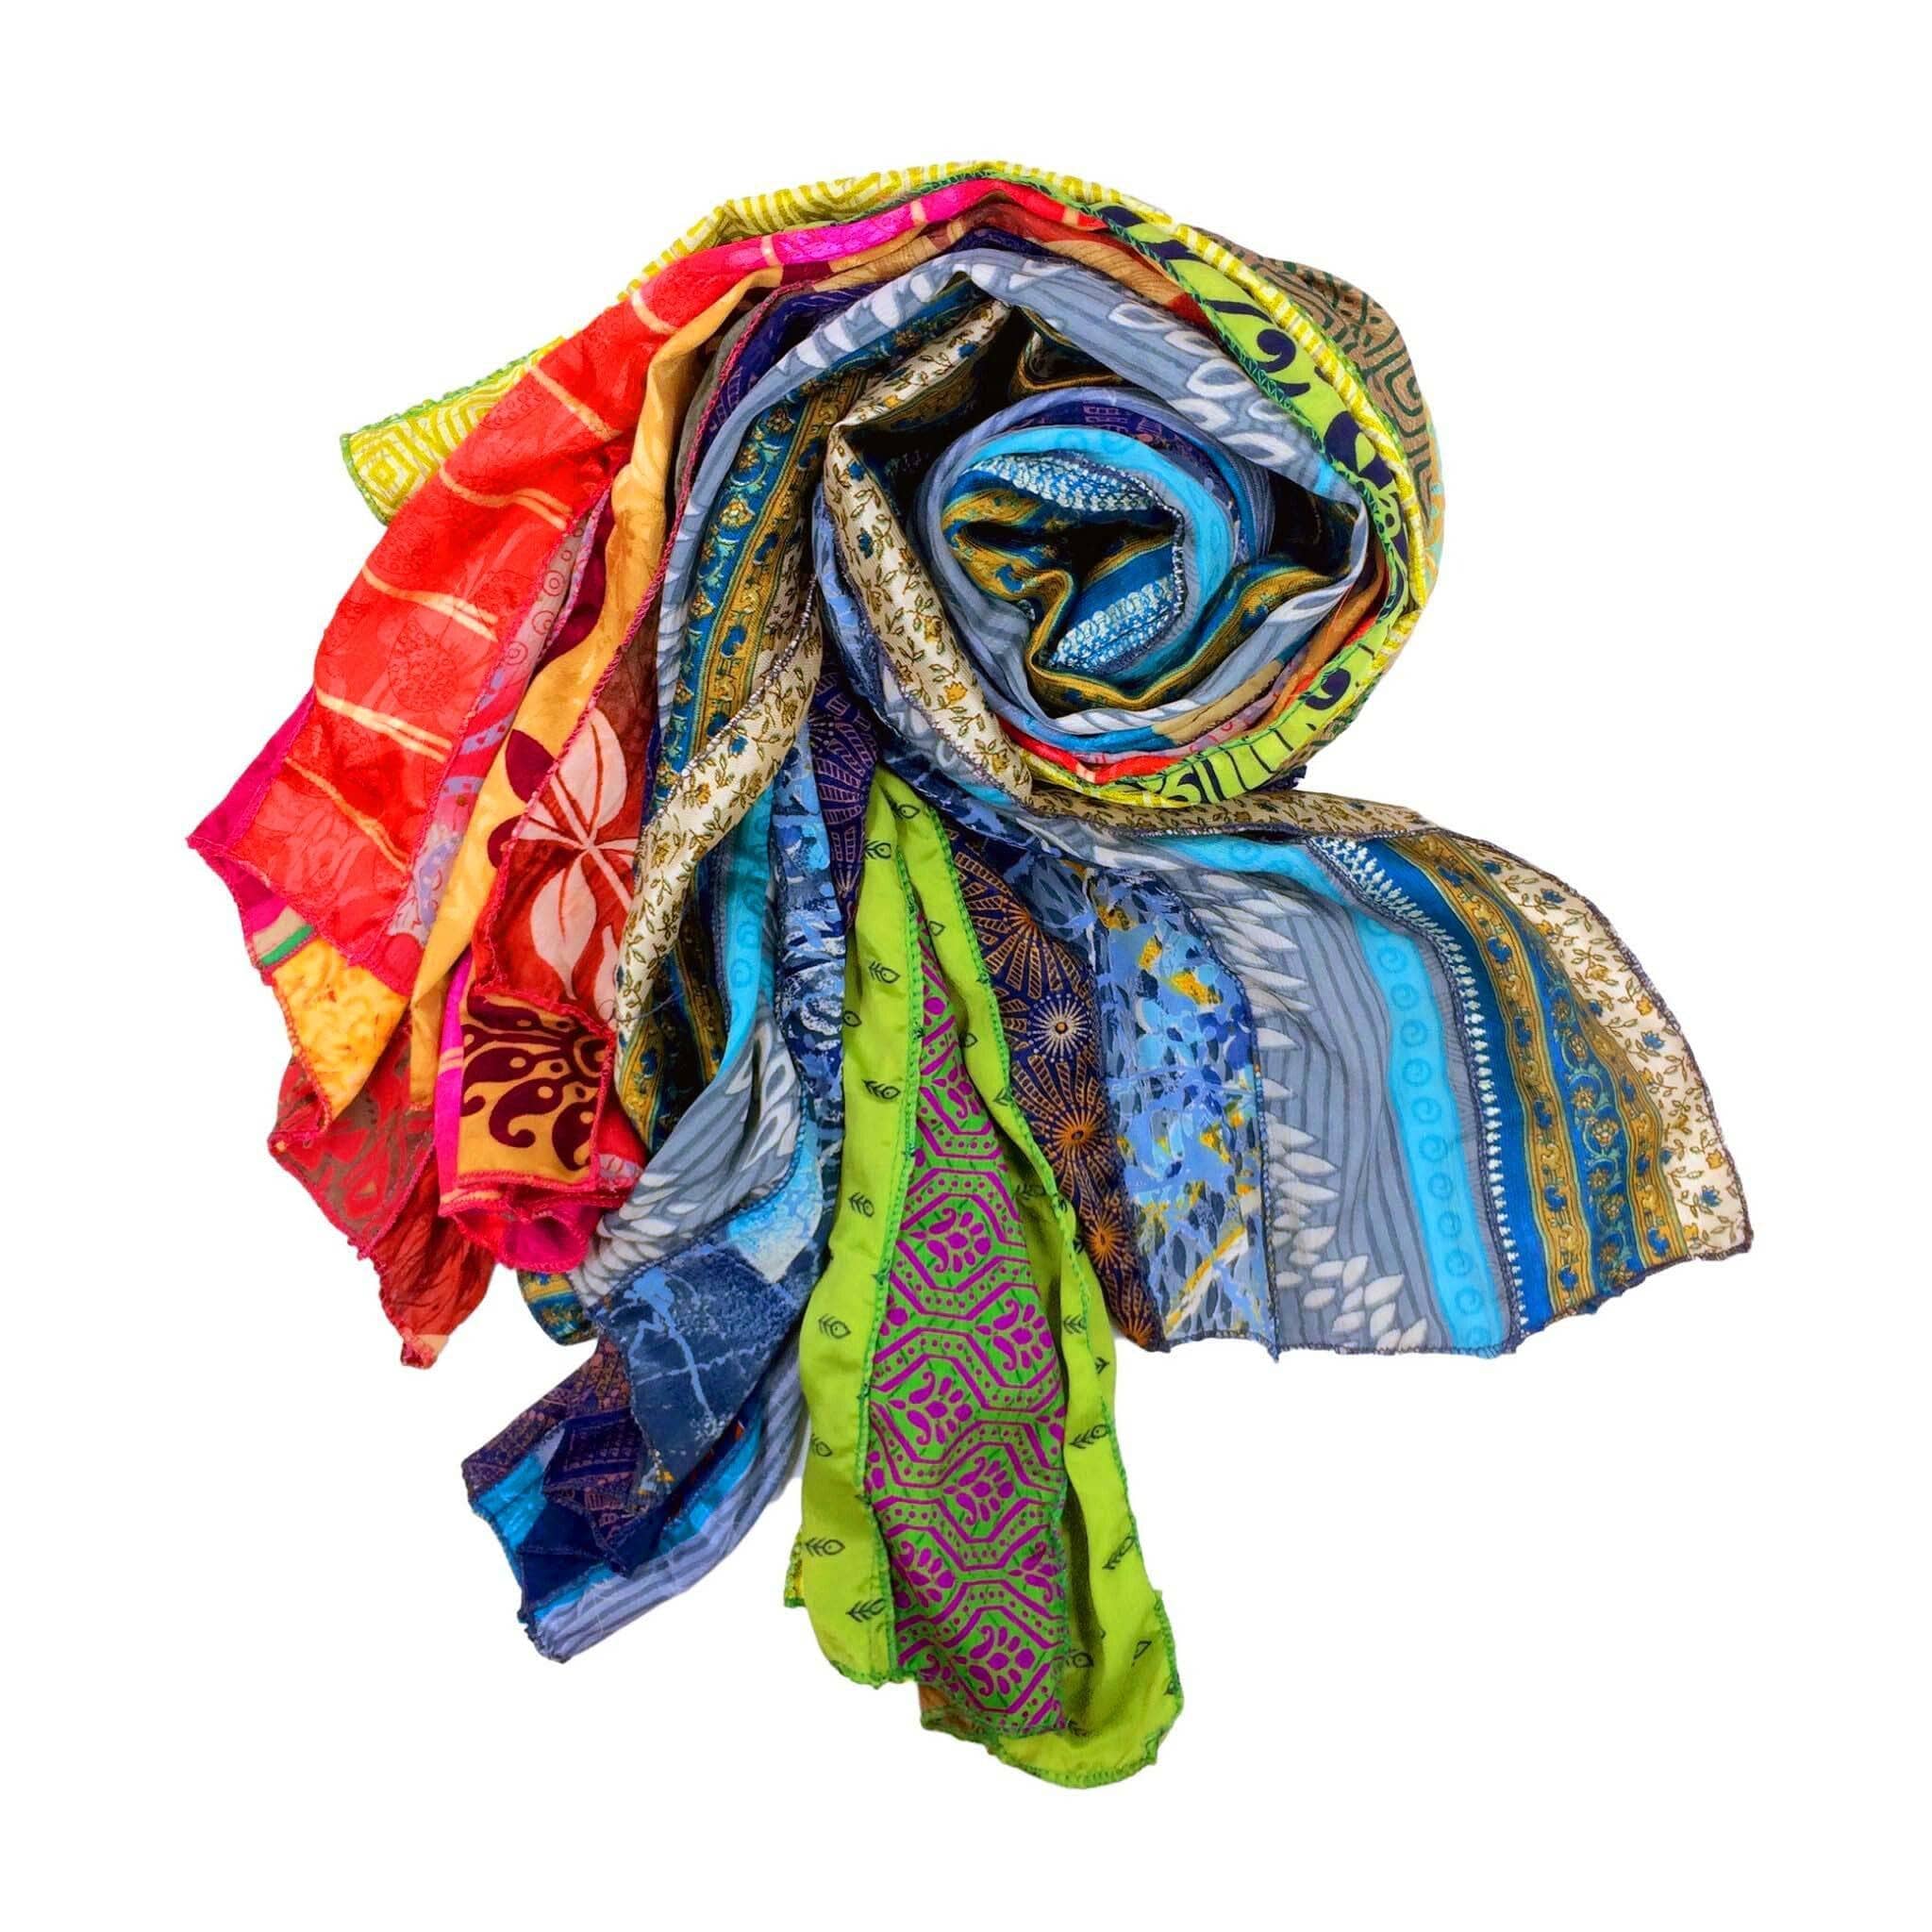 Get Your Wardrobe Fall-Ready with Silk Scarves & Wool-Blend Shawls